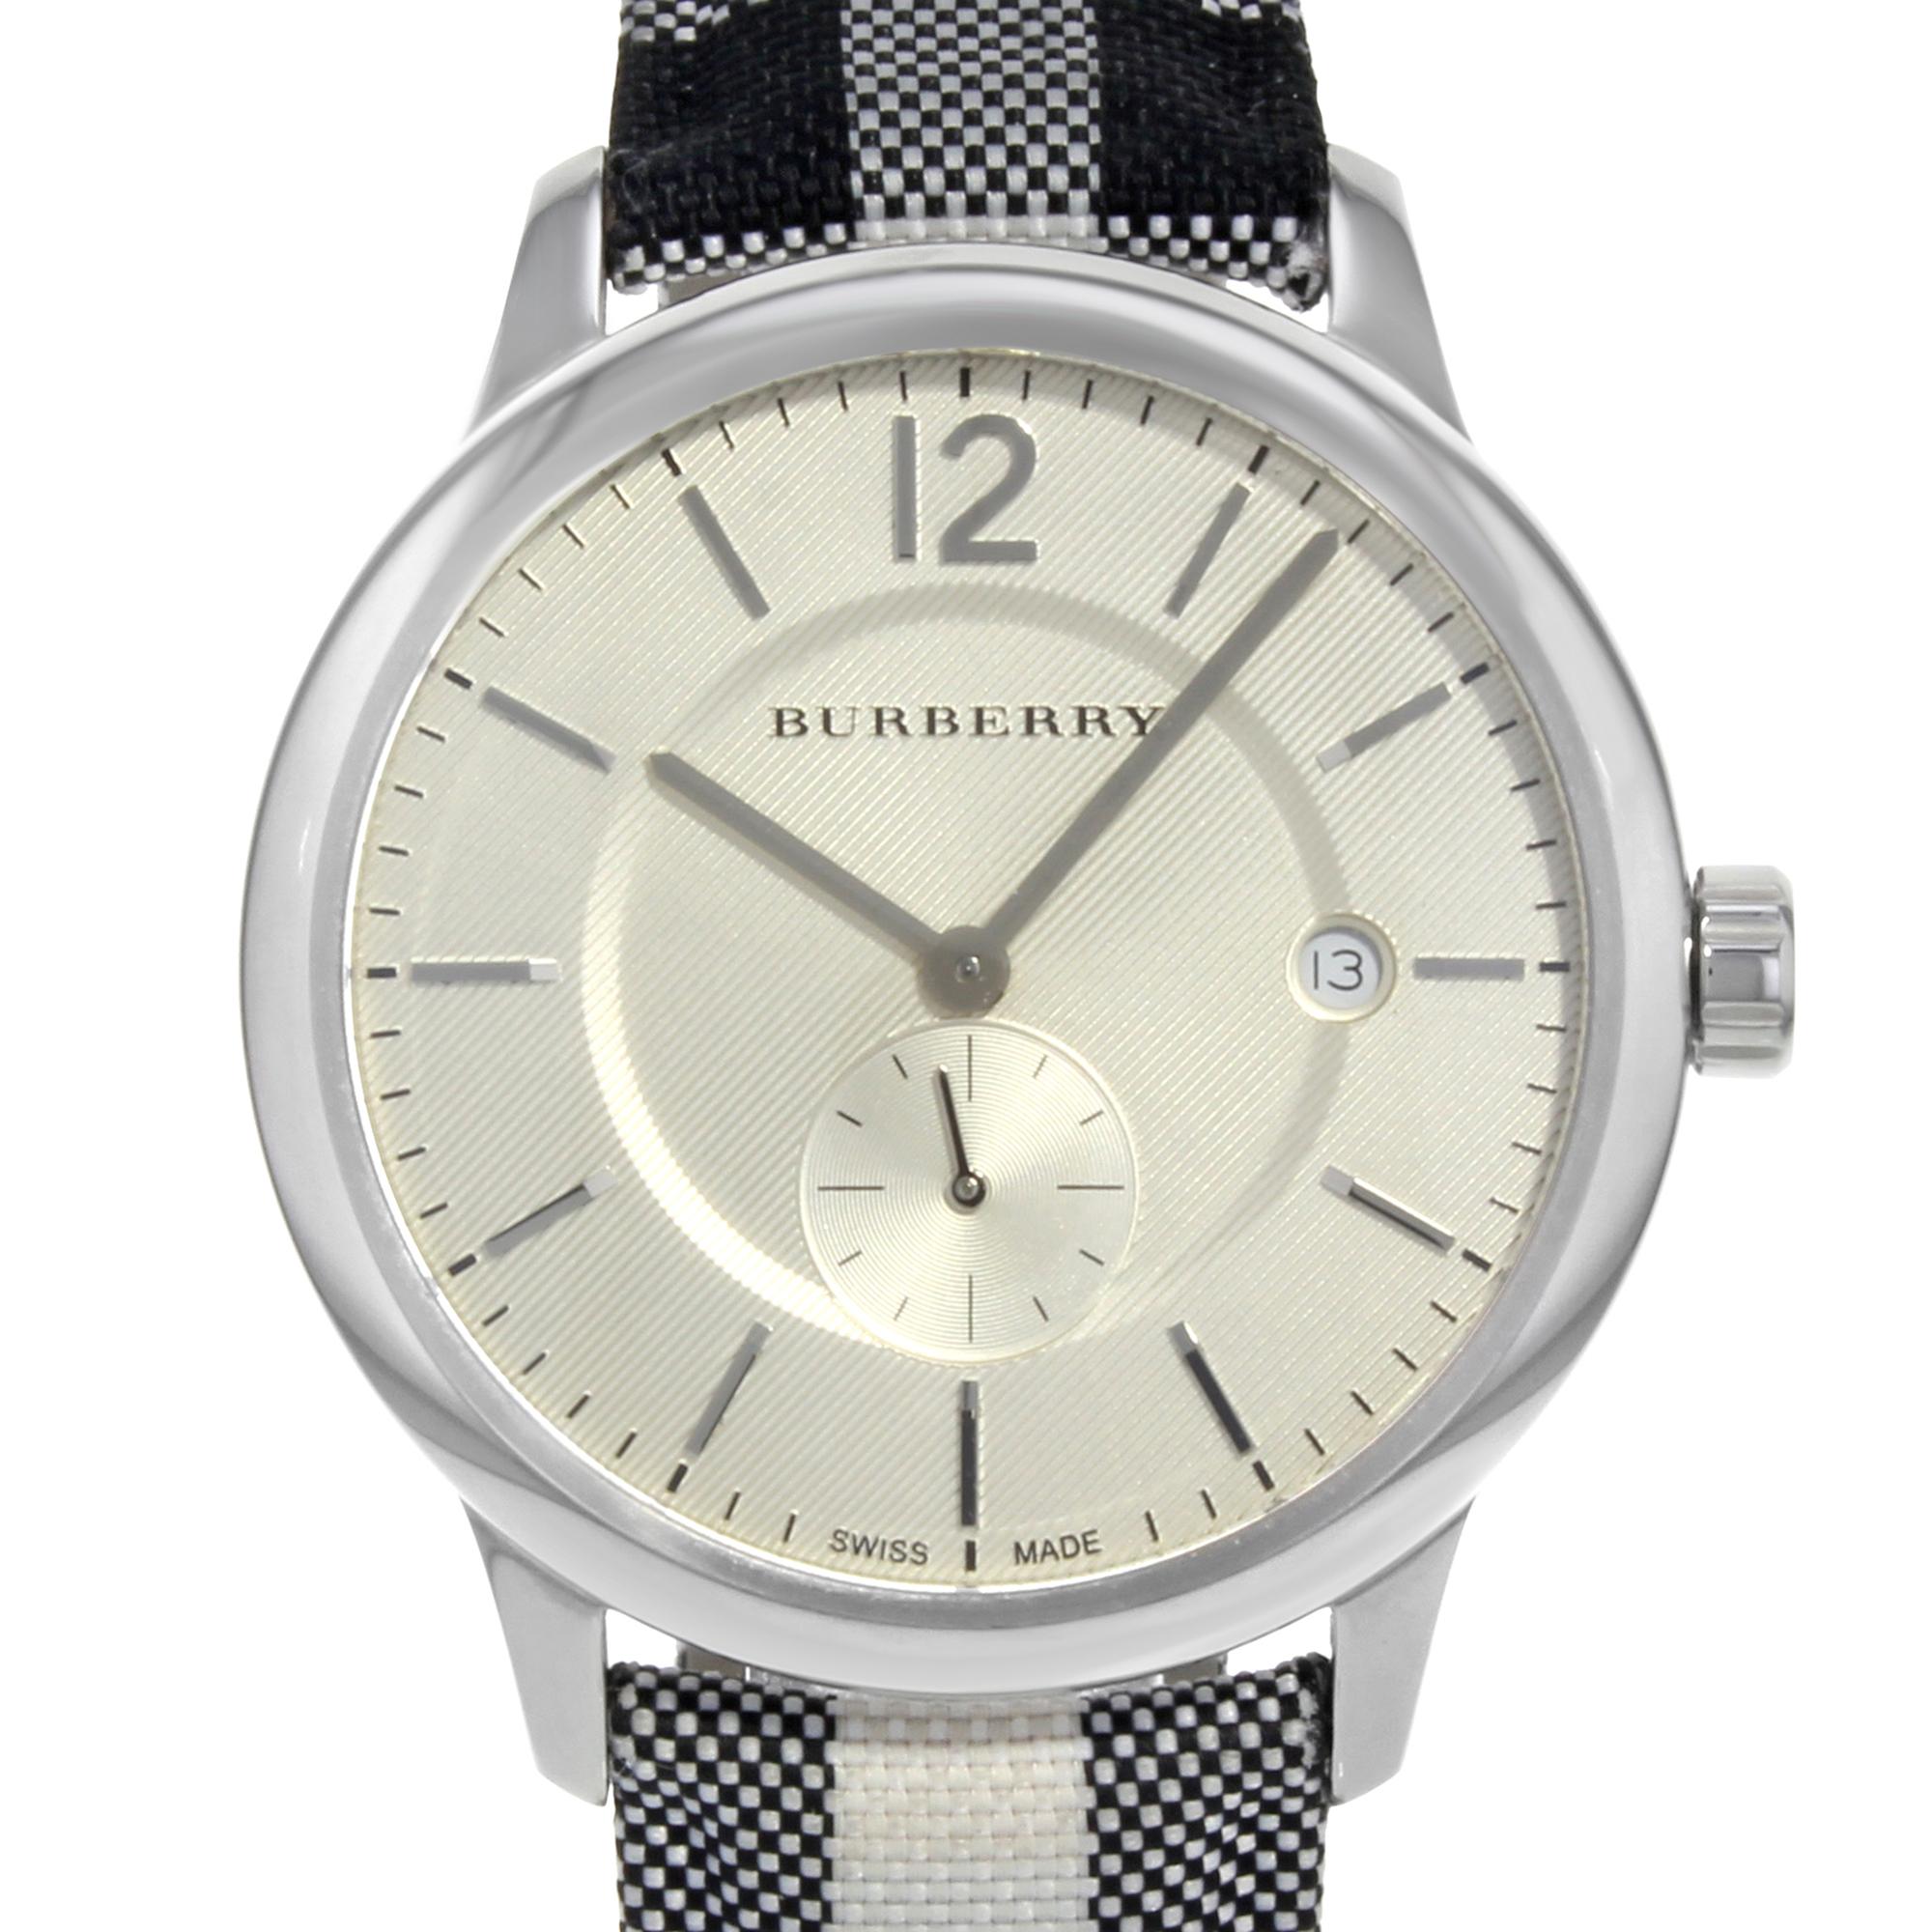 This pre-owned Burberry The Classic Round BU10002 is a beautiful Unisex timepiece that is powered by a quartz movement which is cased in a stainless steel case. It has a round shape face, date, small seconds subdial dial and has hand unspecified